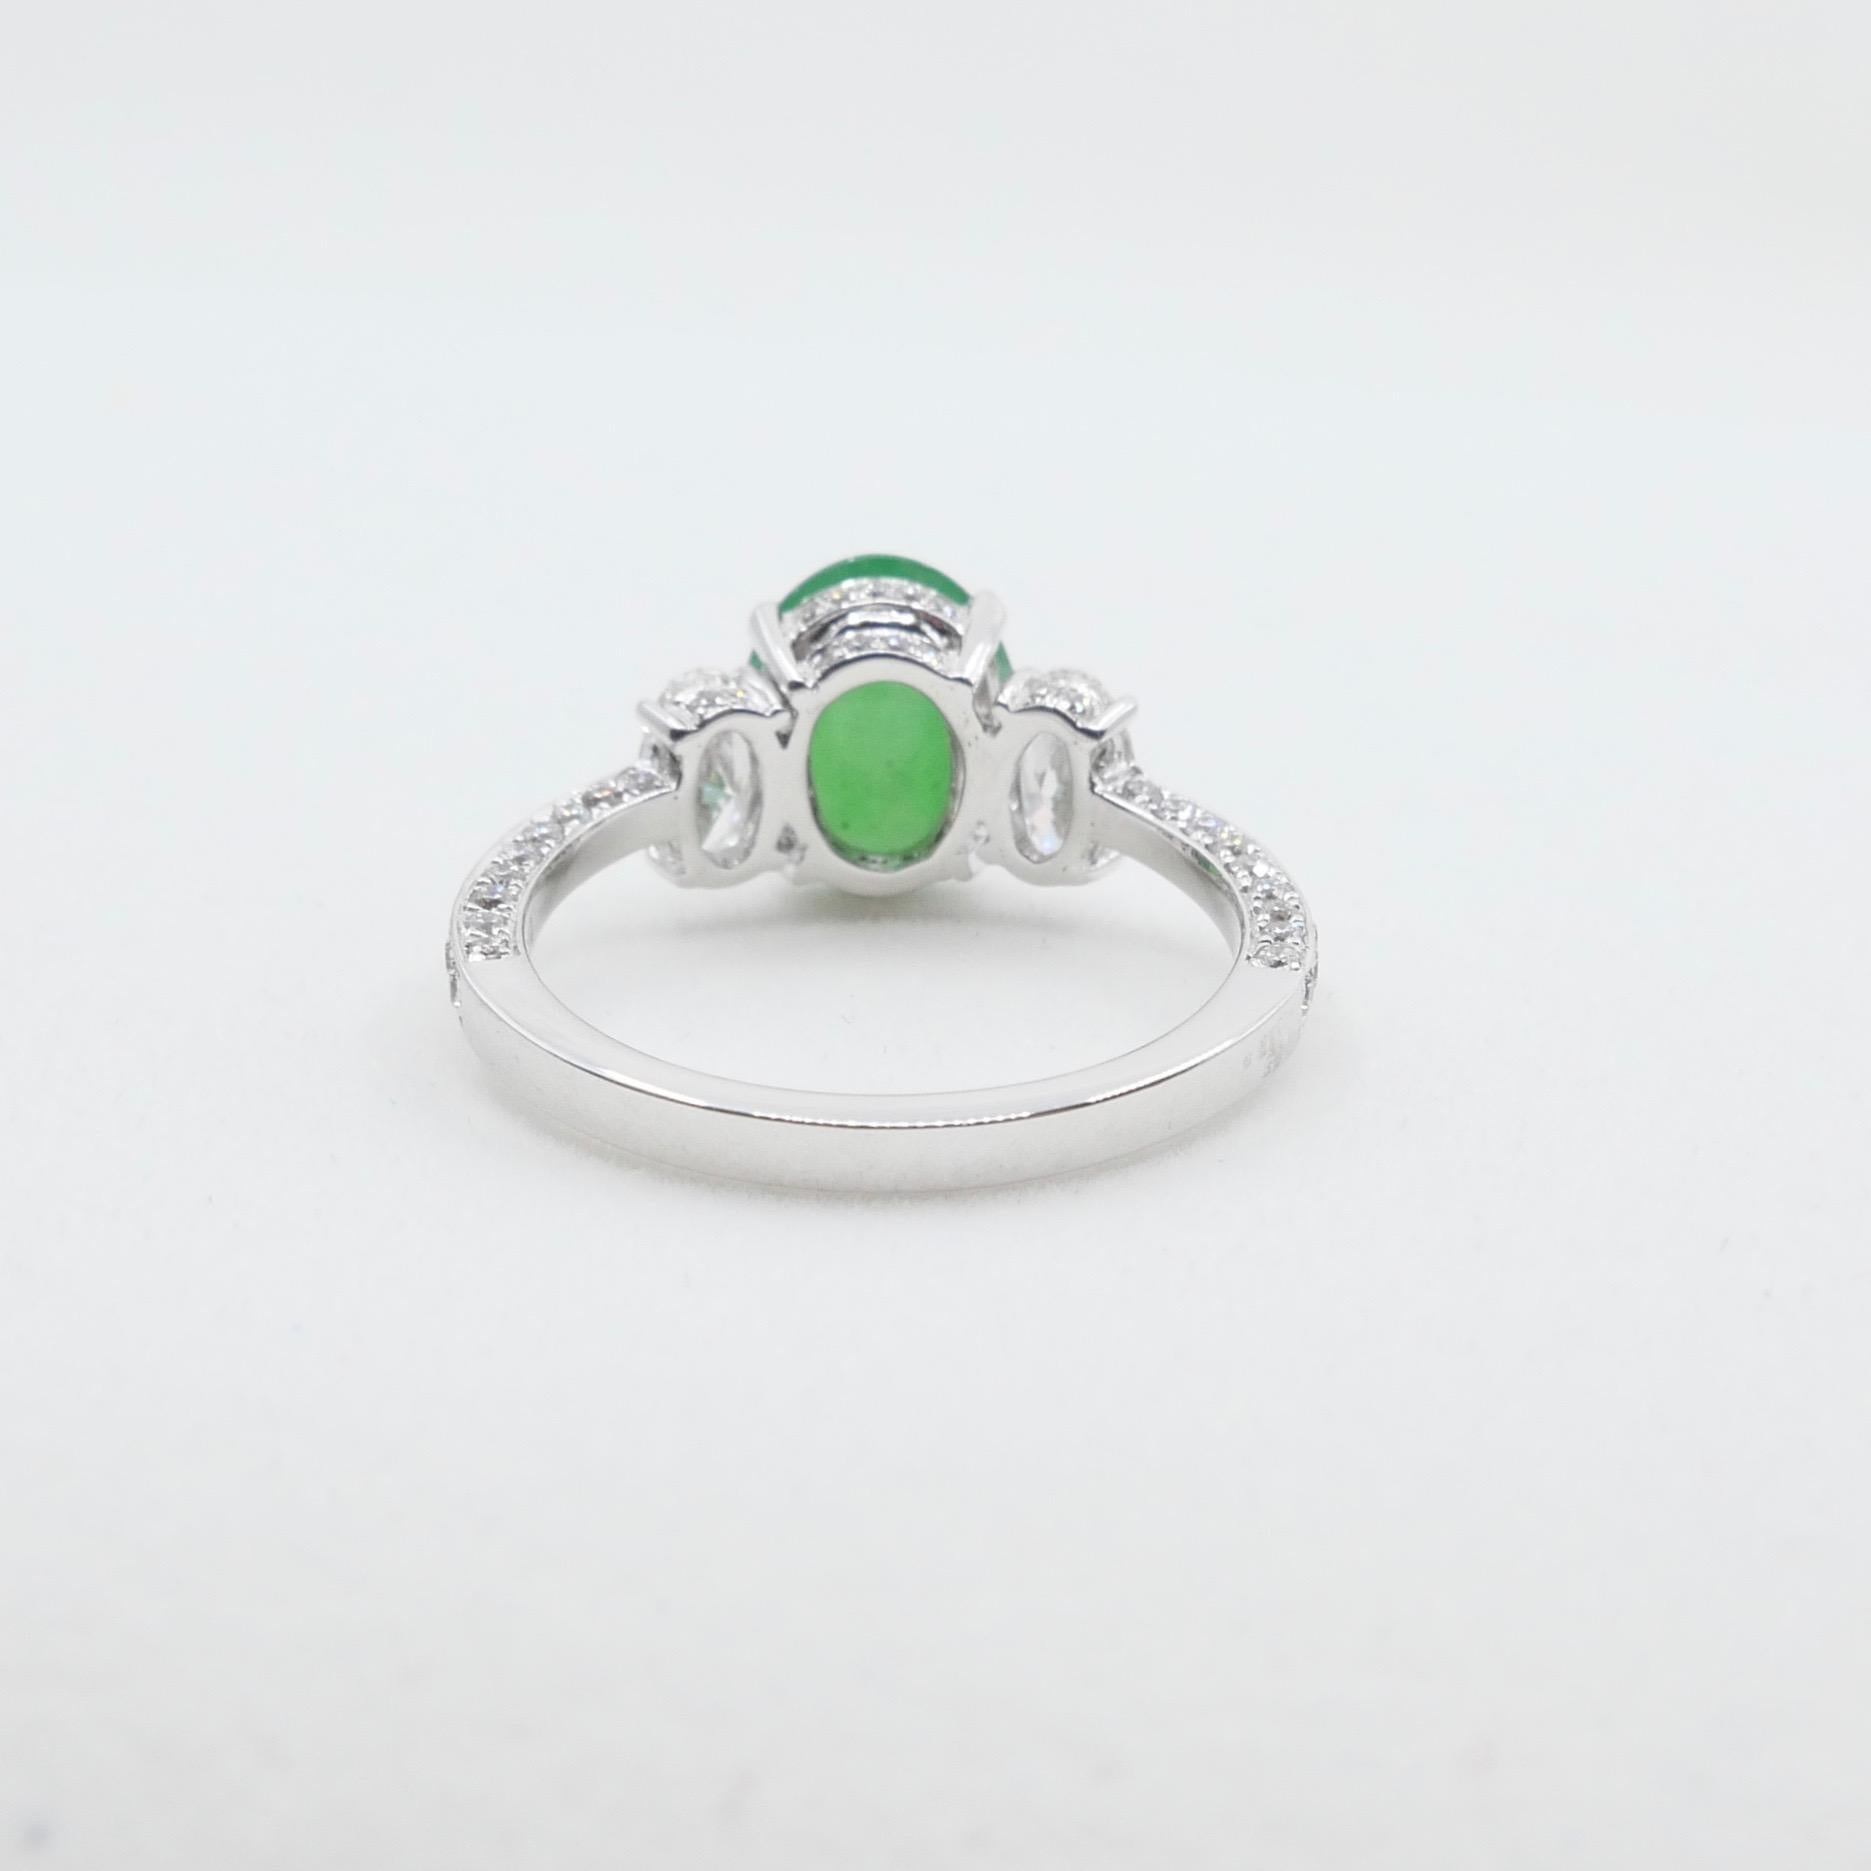 Certified 2.27 Cts Natural Jade & Oval Diamond Cocktail Ring, Apple Green Color For Sale 6